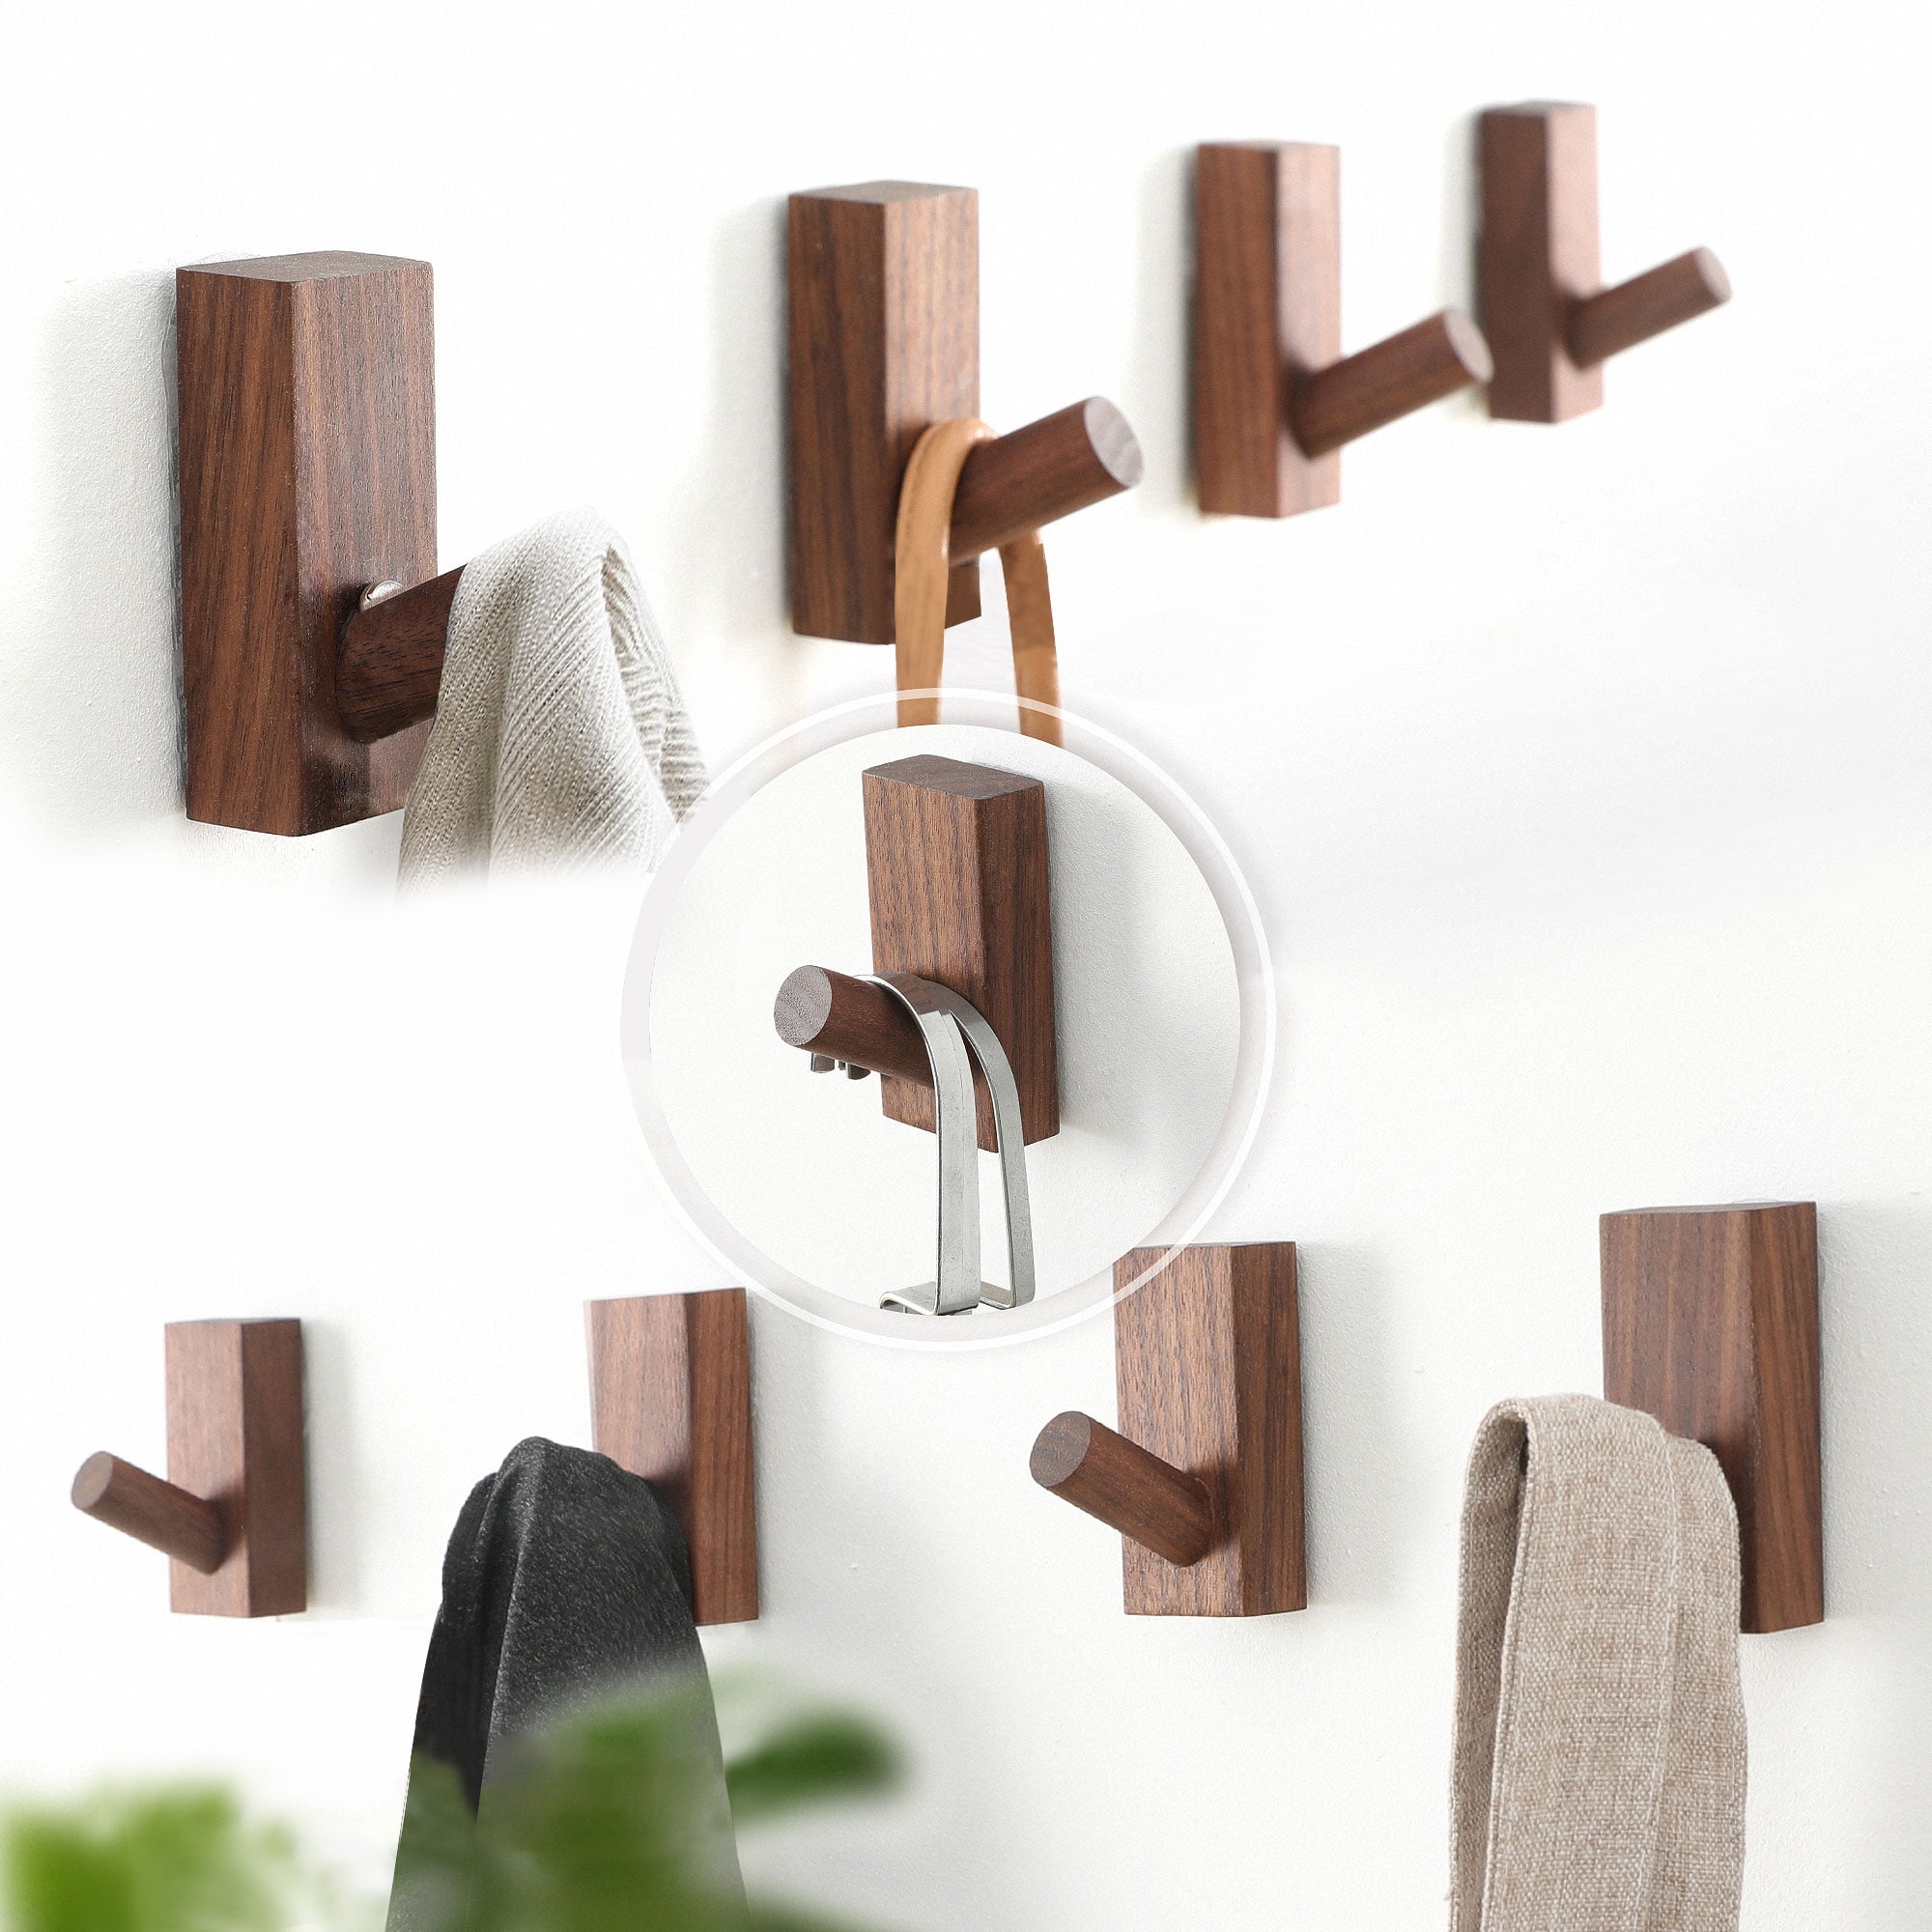 Wooden Wall Hooks 4 Pack Wooden Coat Decorative Hooks Wall Mounted